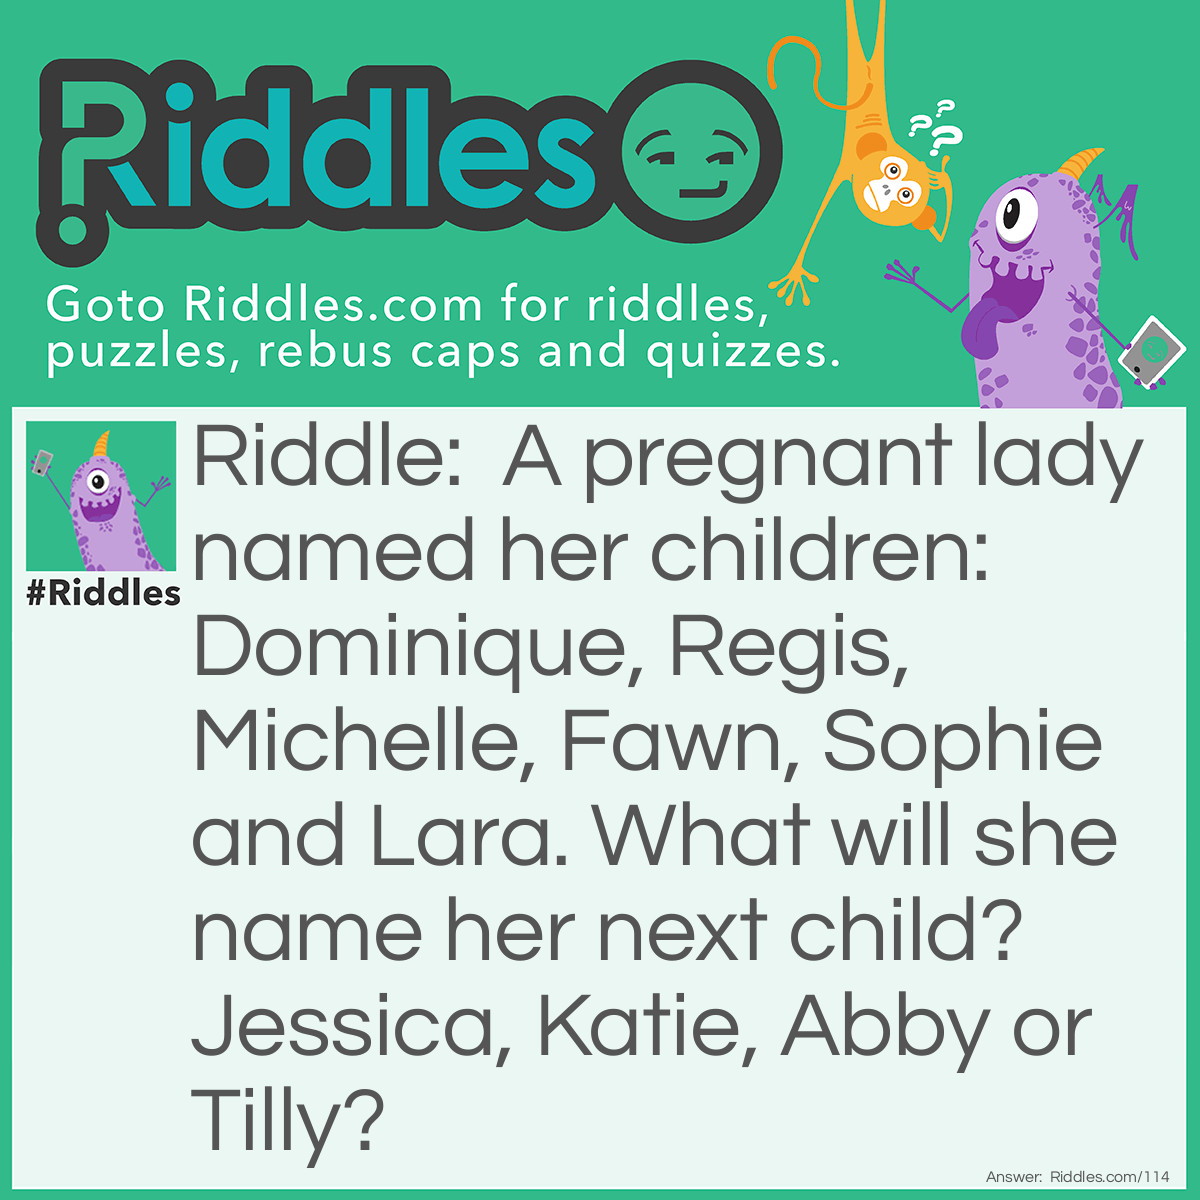 Riddle: A pregnant lady named her <a href="https://www.riddles.com/riddles-for-kids">children</a>: Dominique, Regis, Michelle, Fawn, Sophie, and Lara. What will she name her next child? Jessica, Katie, Abby, or Tilly? Answer: Tilly. She seems to follow the scale Do, Re, Me, Fa, So, La, and then Ti.